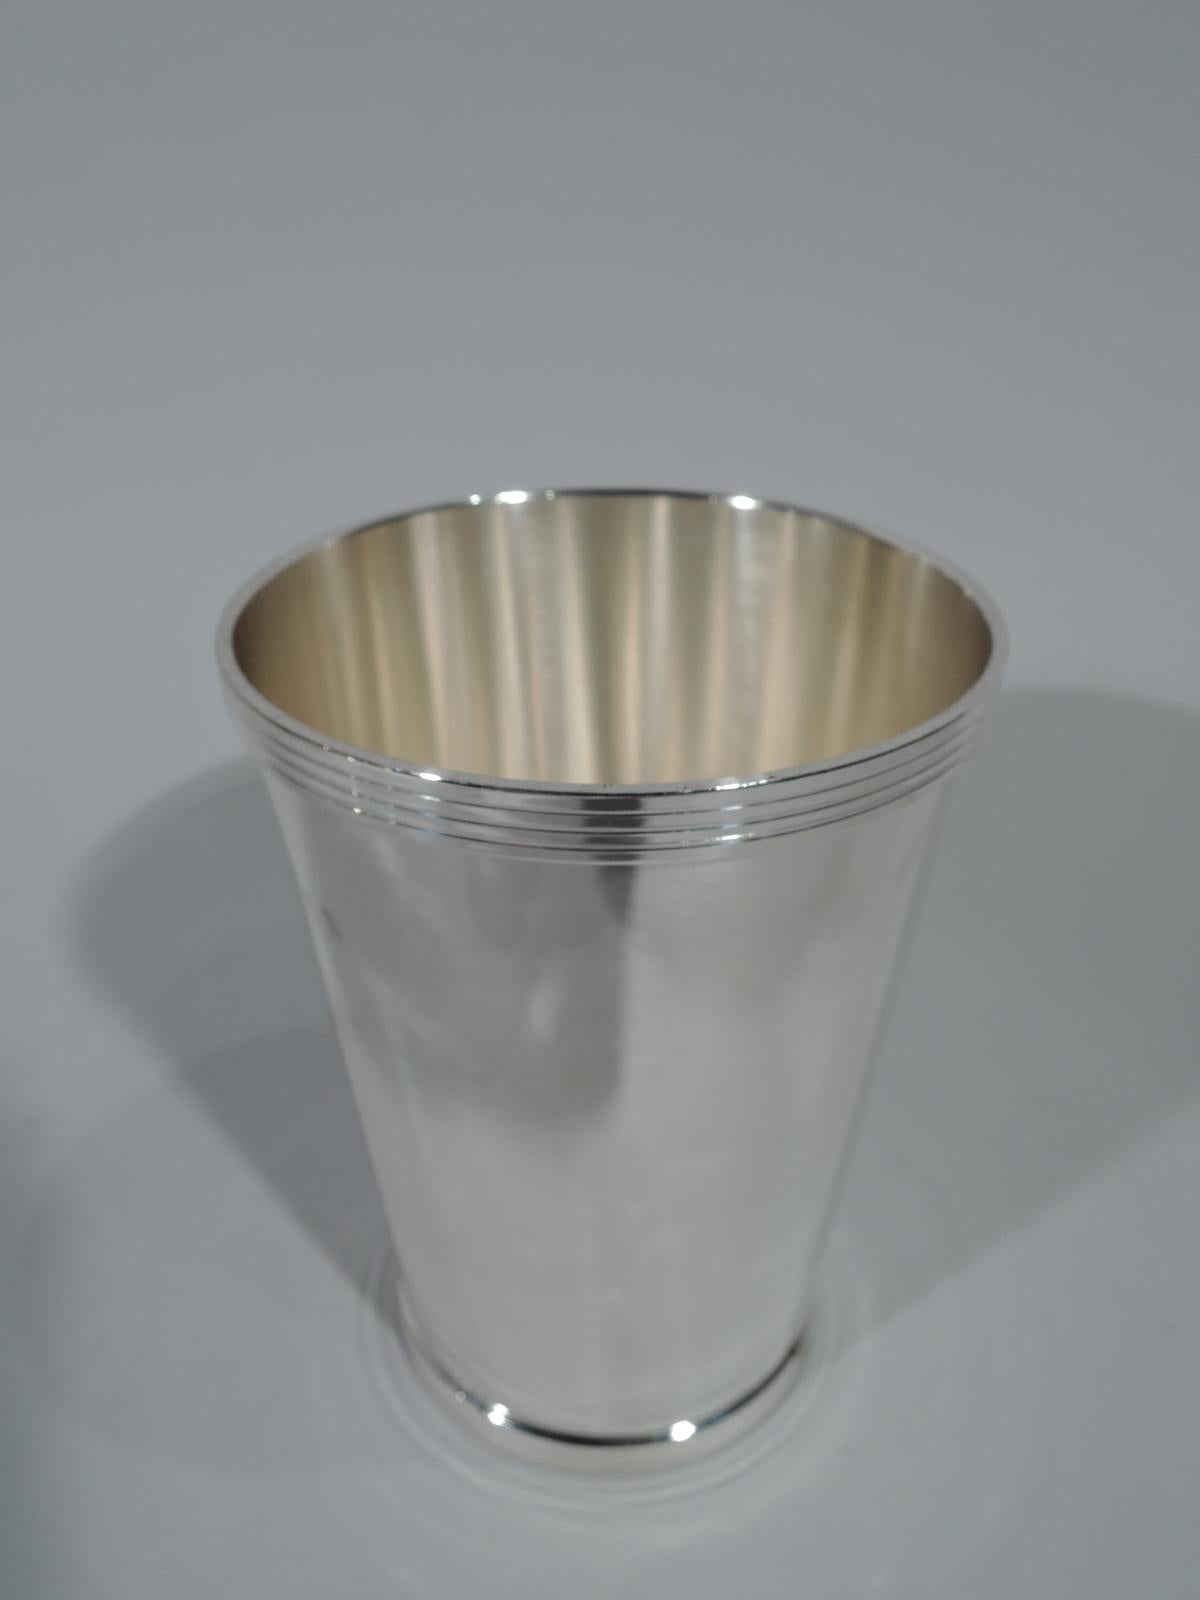 Pair of sterling silver mint julep cups. Made by Fisher by Jersey city. Tall and traditional form with reeded rim and foot. Hallmark includes no. 52. Total weight: 11.4 troy ounces.